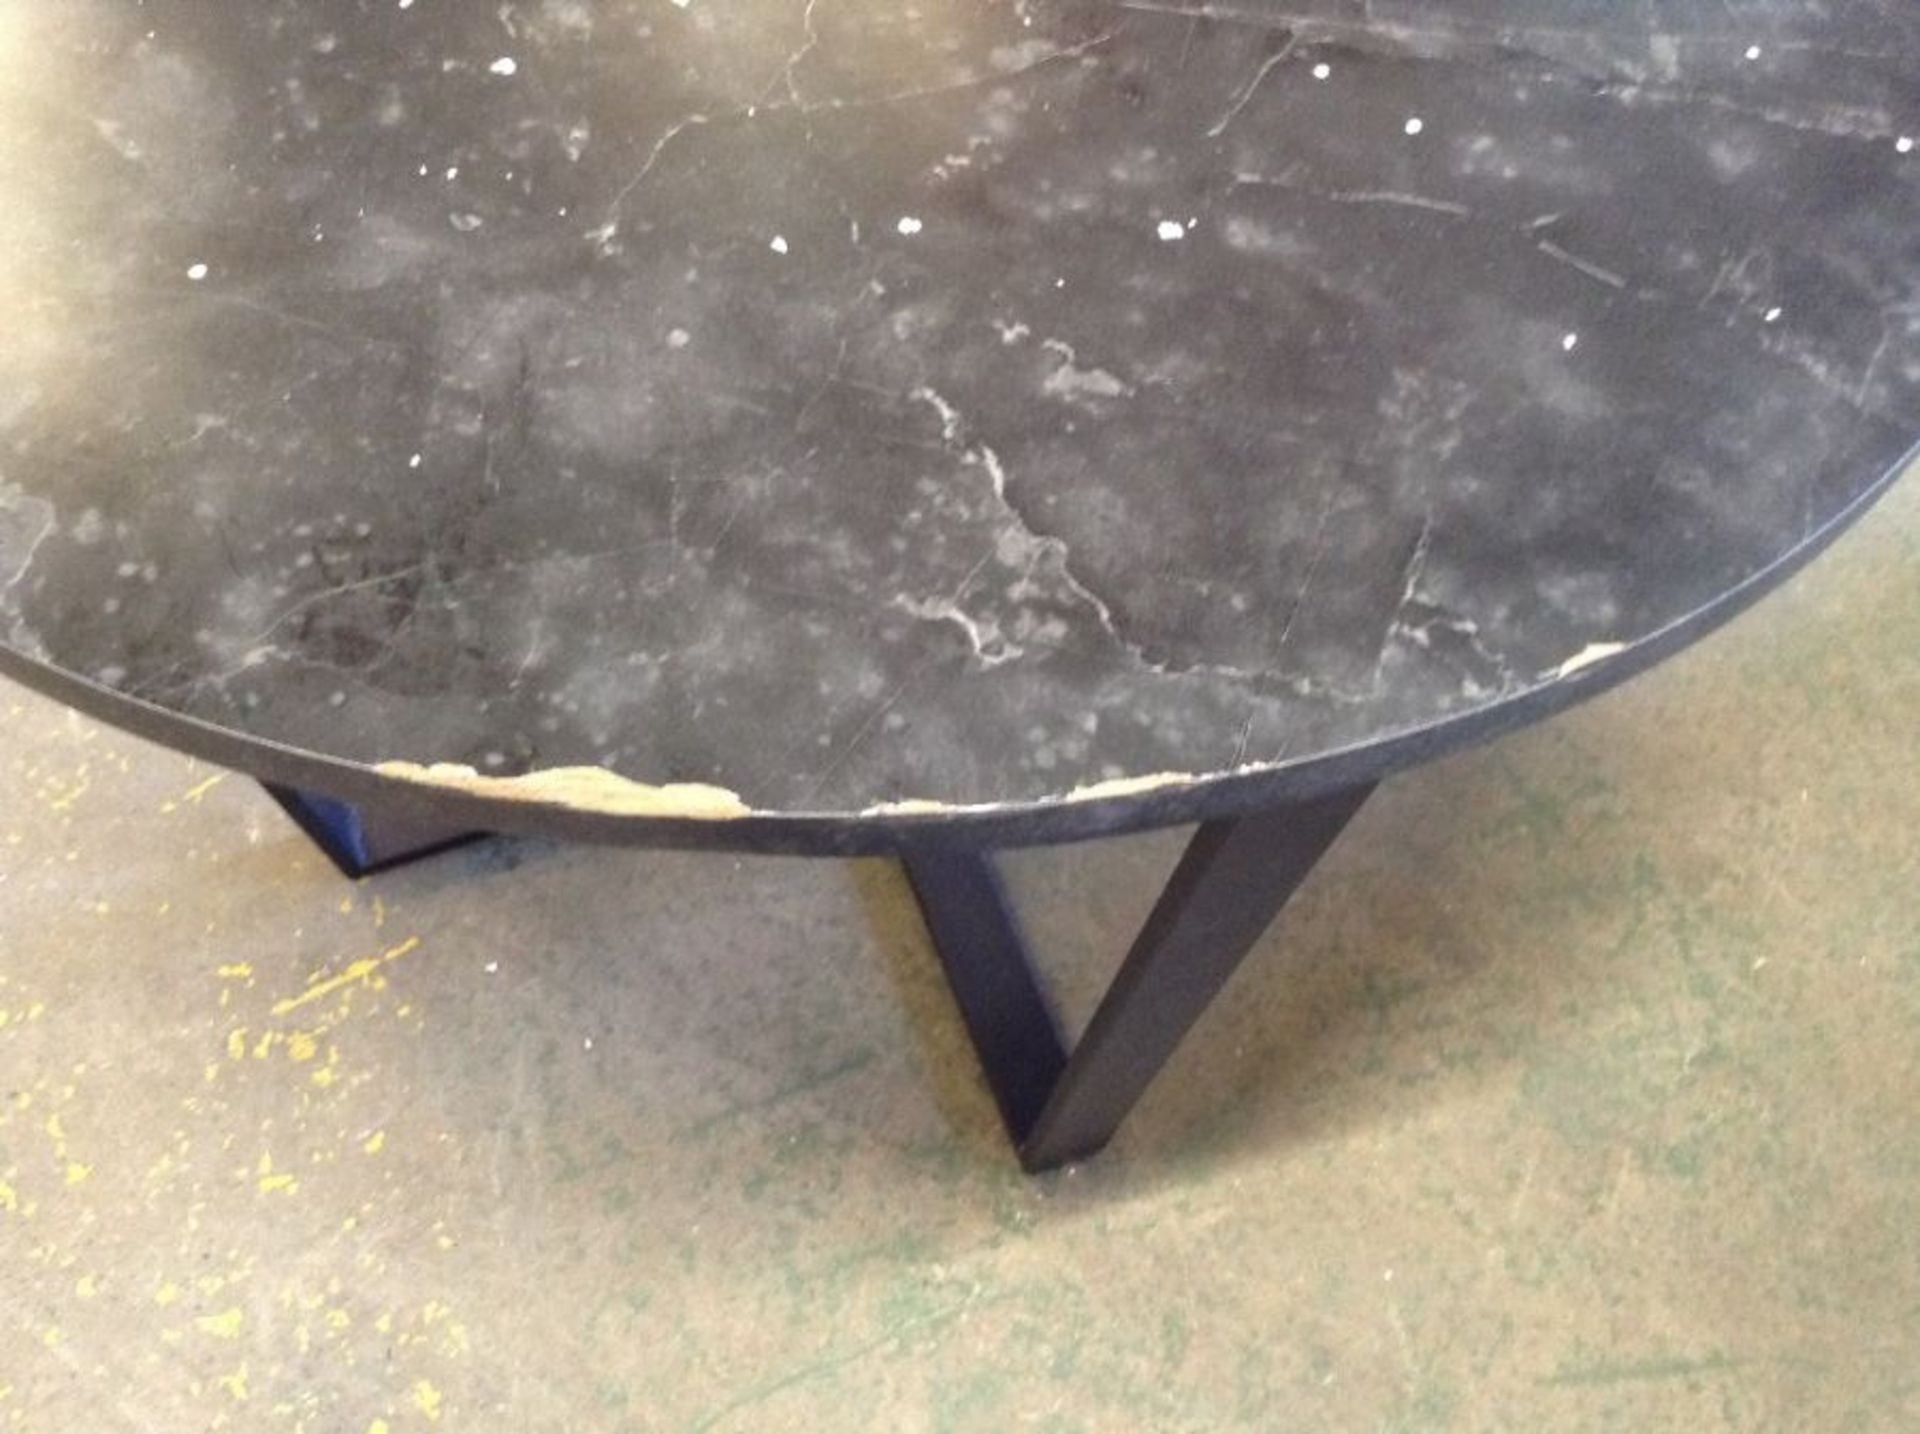 |1X||Made.com Amble 4 Seat Round Dining Table Black Marble Effect & Black RRP £279|1Q5524/15|MAD- - Image 2 of 2